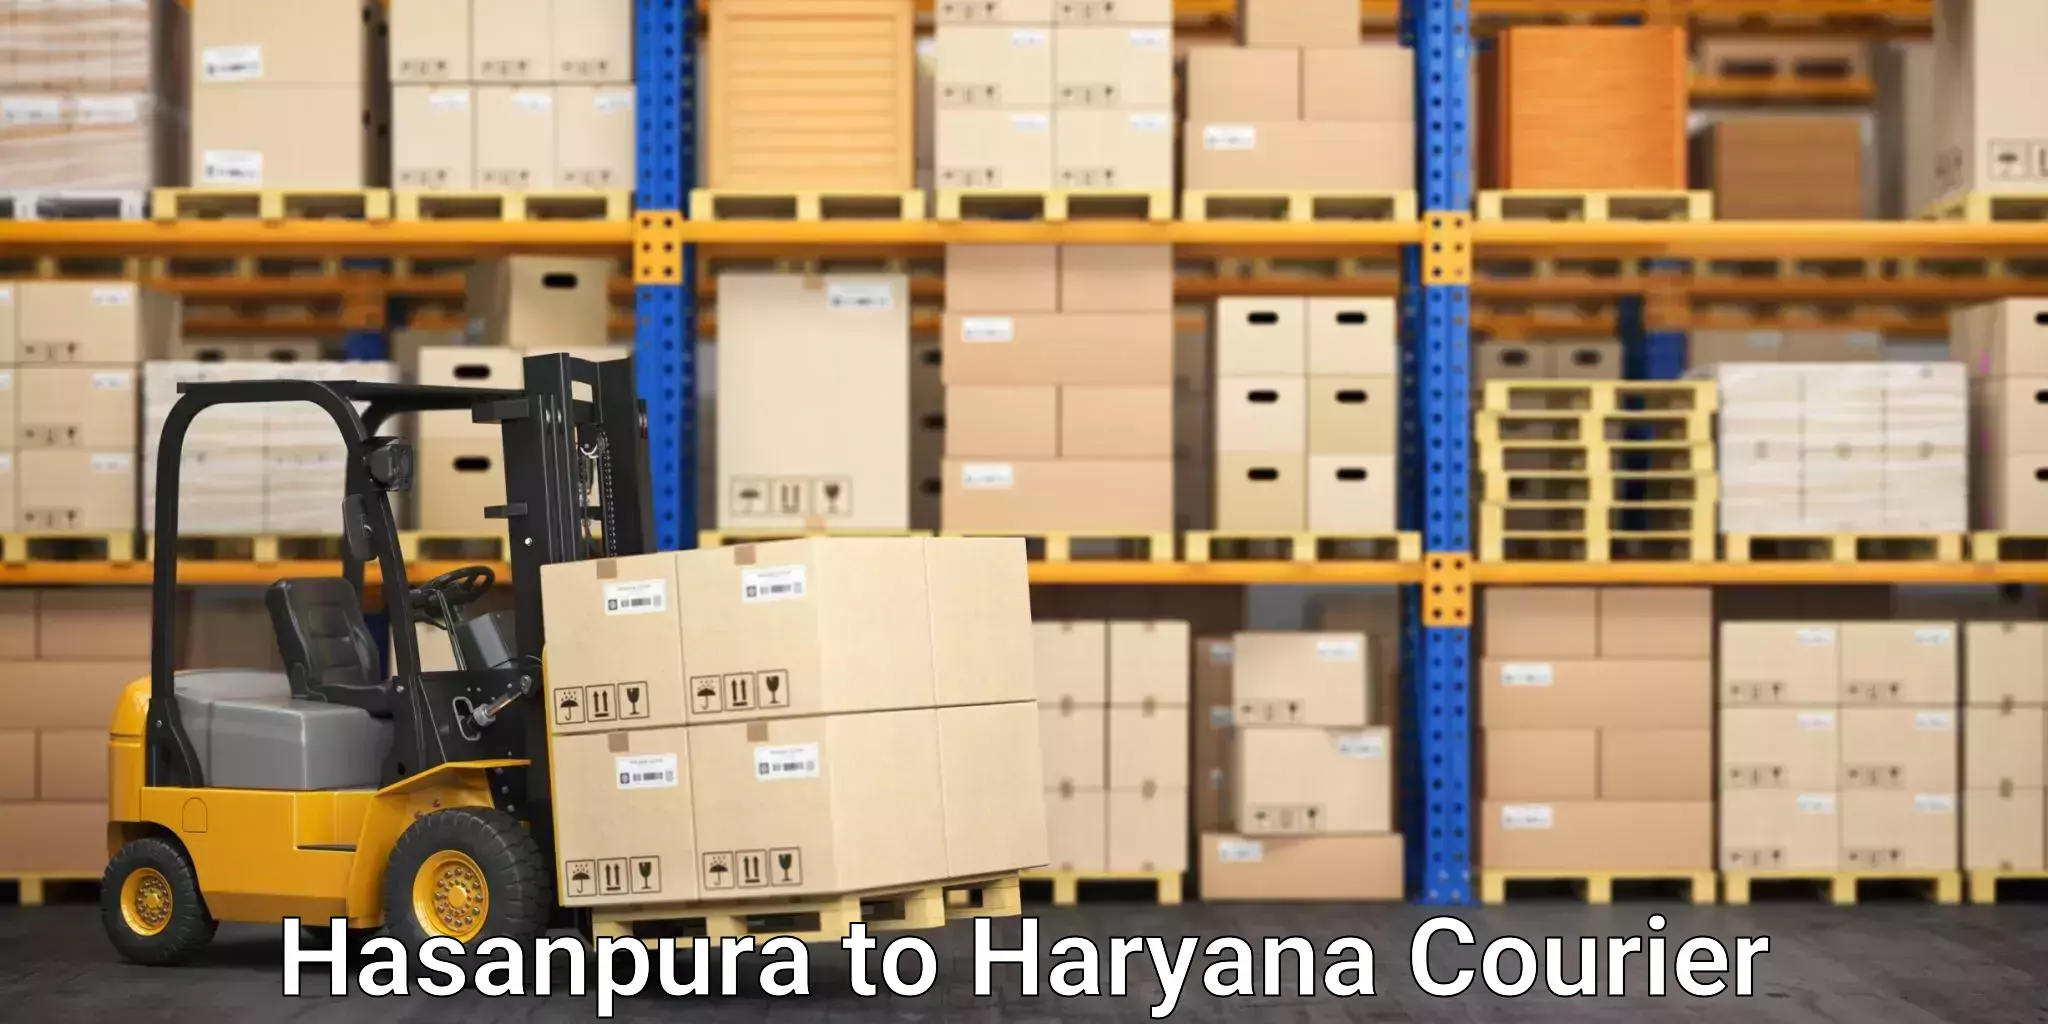 Reliable relocation services Hasanpura to Haryana